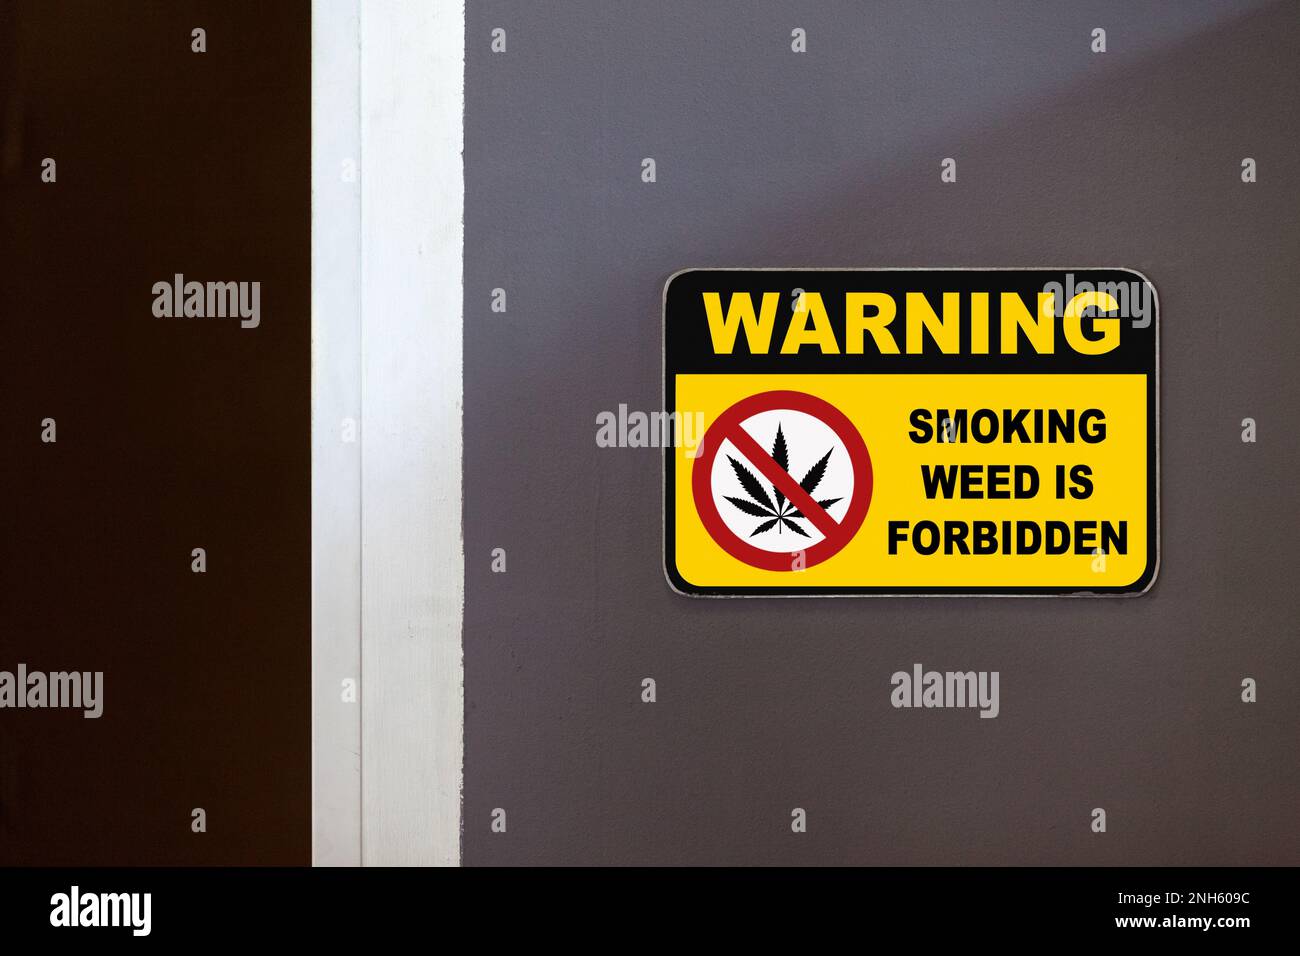 Yellow and black warning sign on the side of an open door stating in 'Warning - Smoking weed is forbidden'. Stock Photo